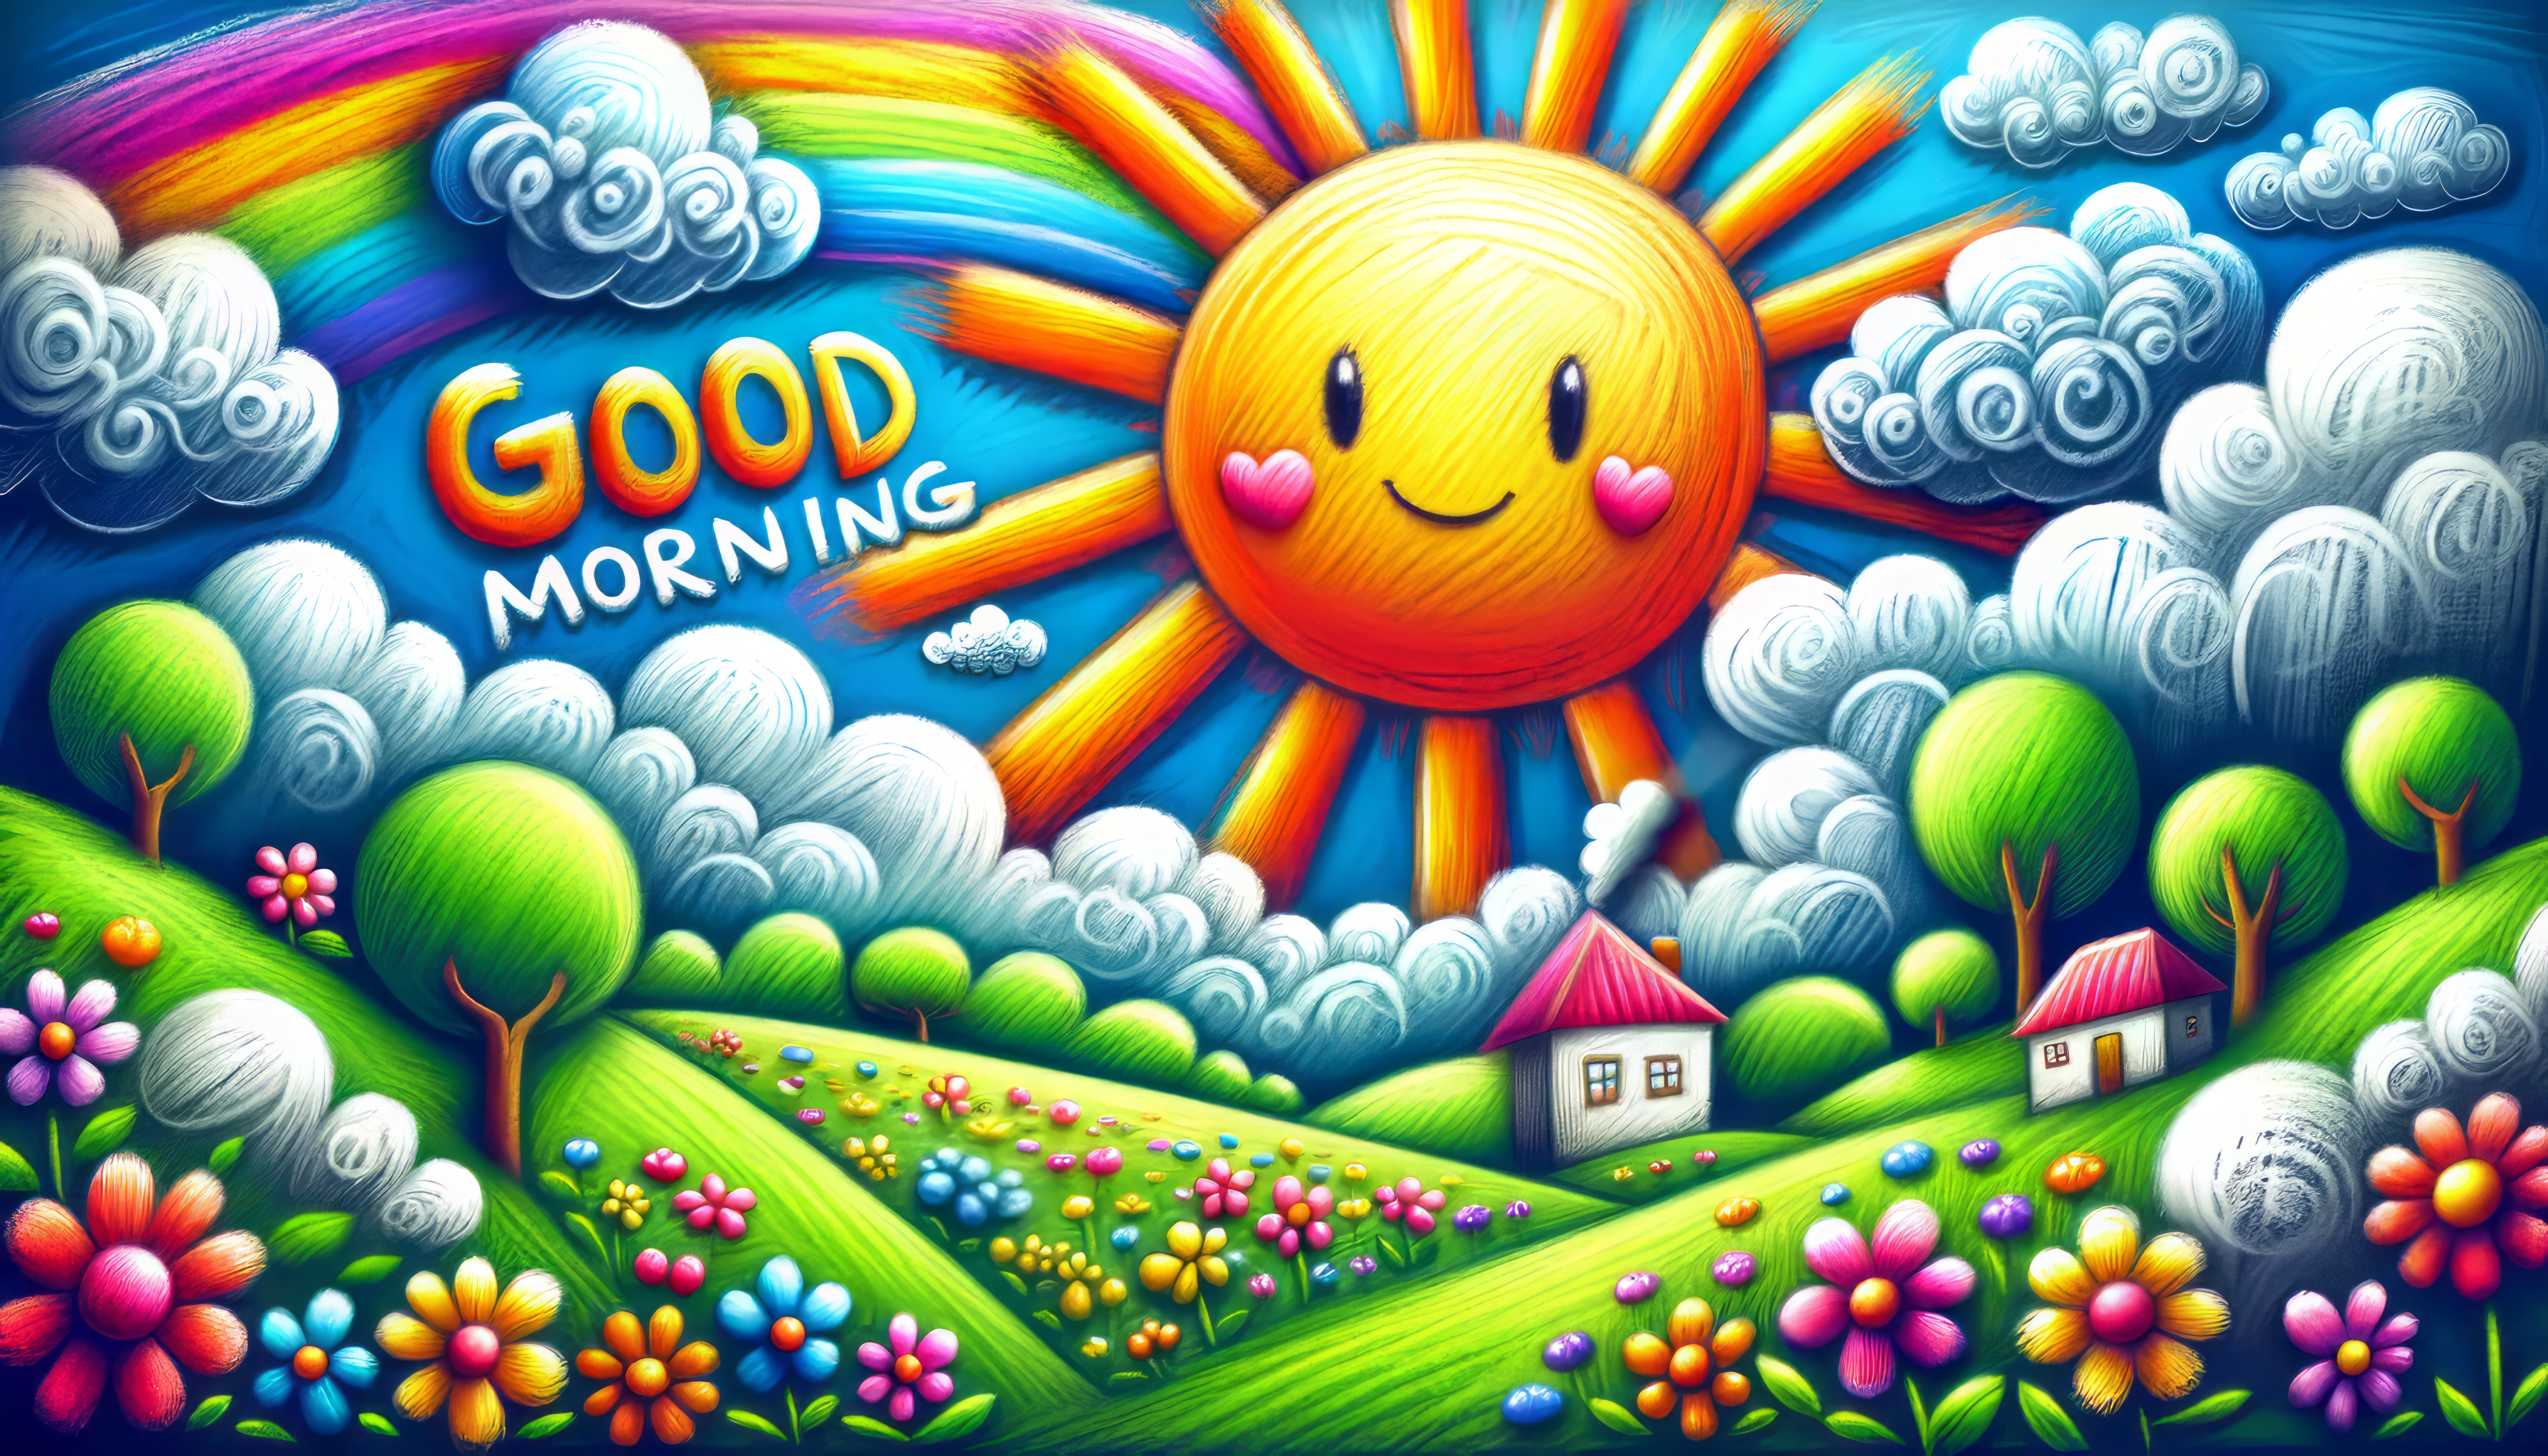 Colorful HD desktop wallpaper with a cheerful 'Good Morning' sun smiling above a vibrant landscape with rolling hills, flowers, and cute houses, ideal for a positive start to the day.